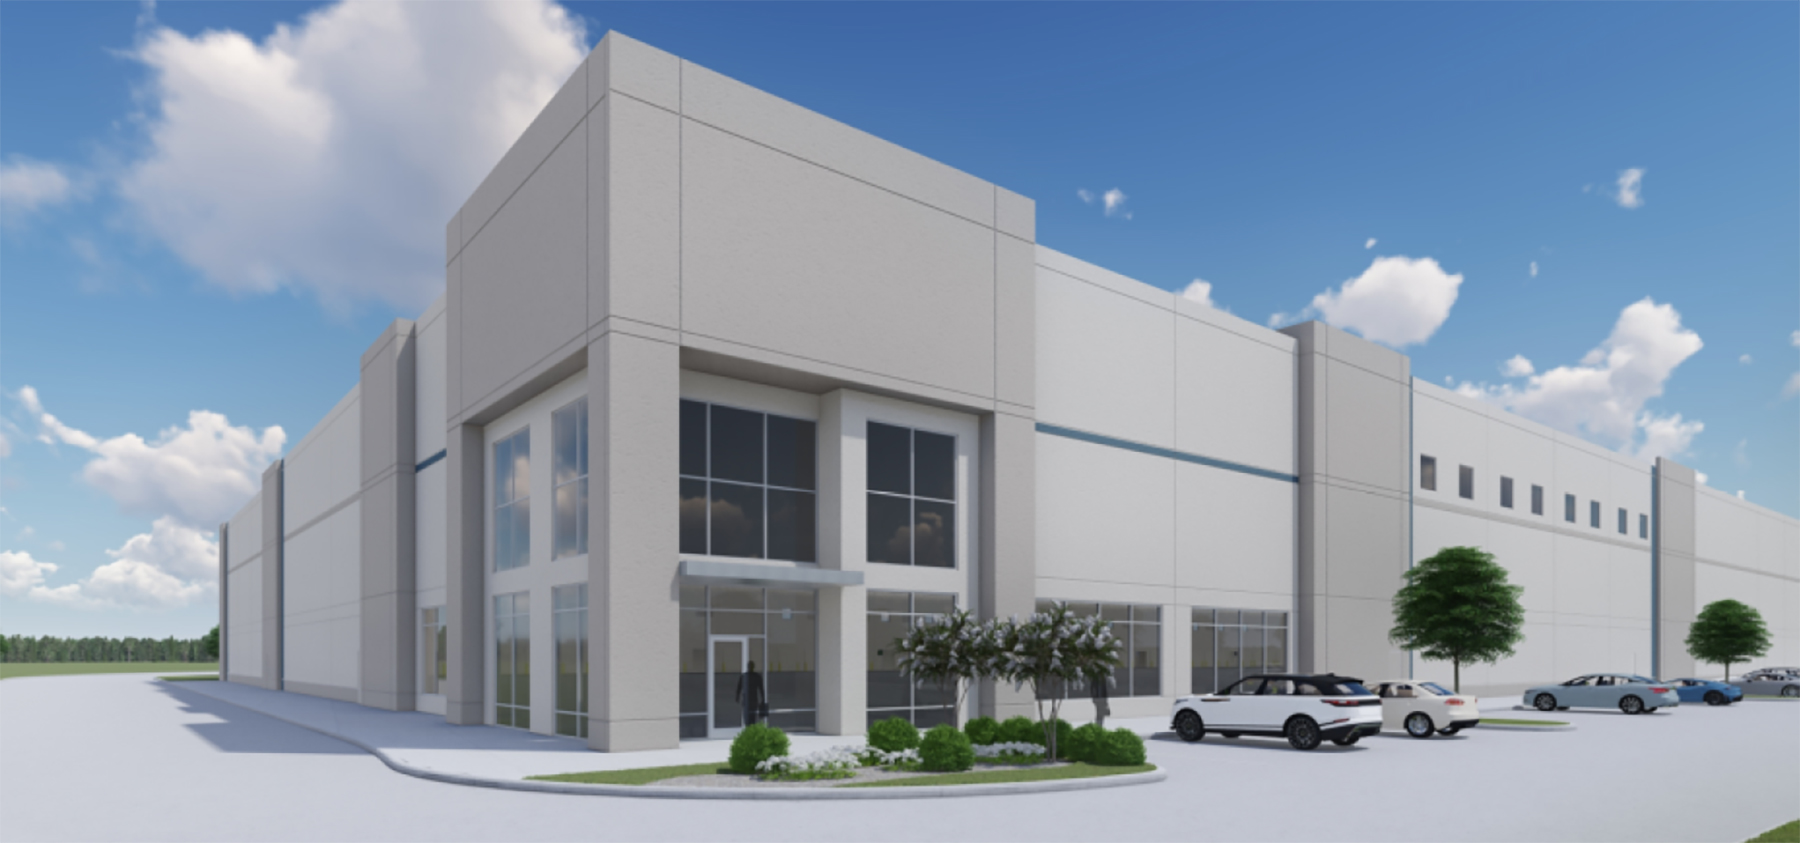 Westport Parkway Distribution Center coming to Haslet, Texas